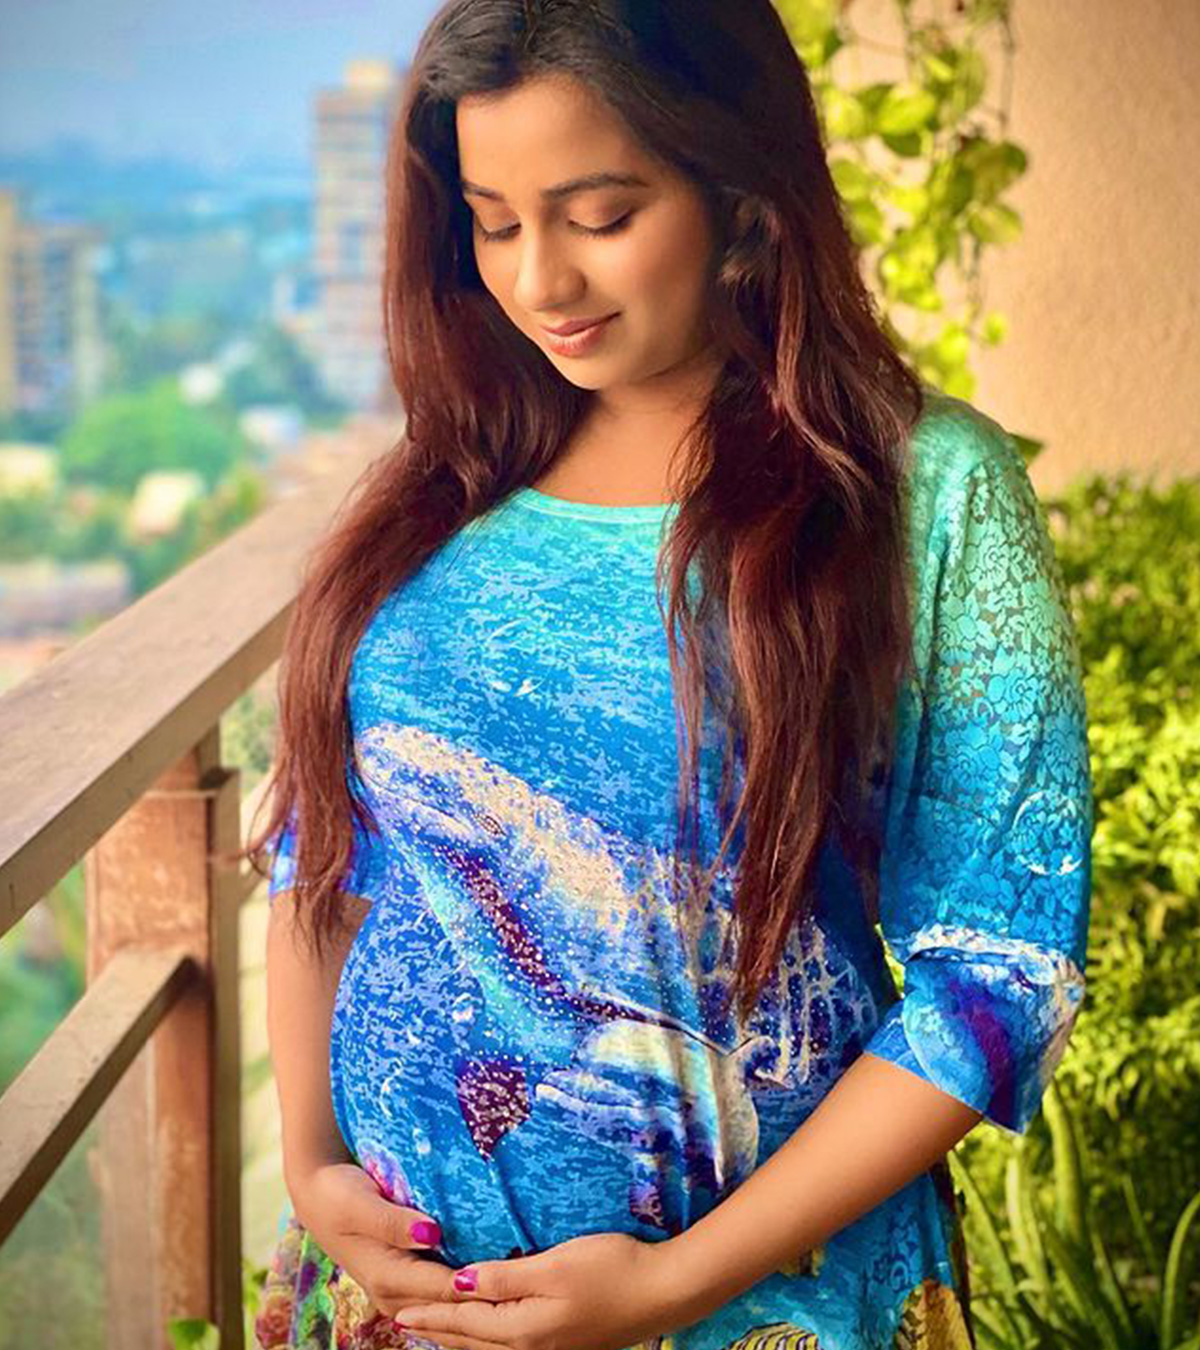 Baby #Shreyaditya Is On Its Way: Singer Shreya Ghoshal Shares The News Of Her Pregnancy With Fans